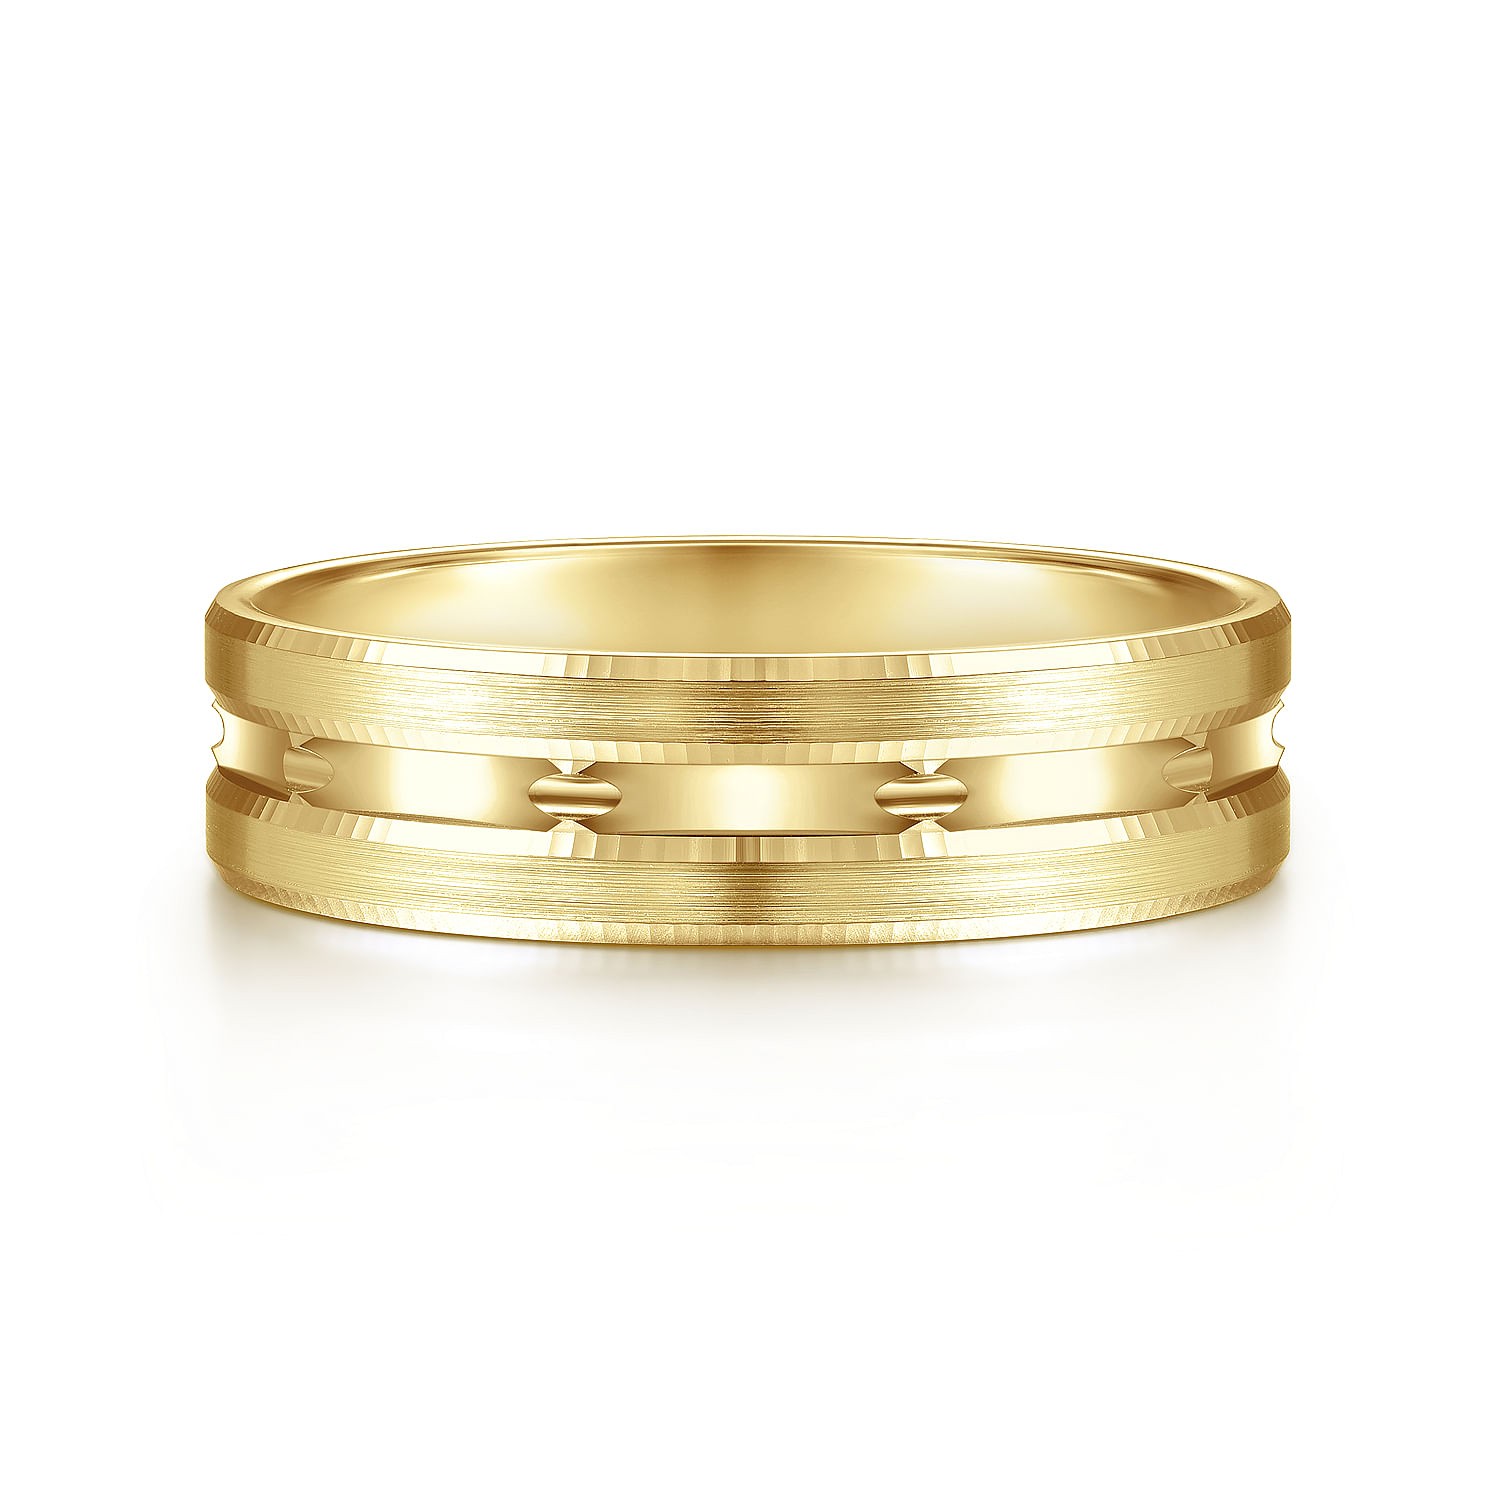 Daniel---14K-Yellow-Gold-6mm---Carved-Men's-Wedding-Band-in-Satin-Finish1